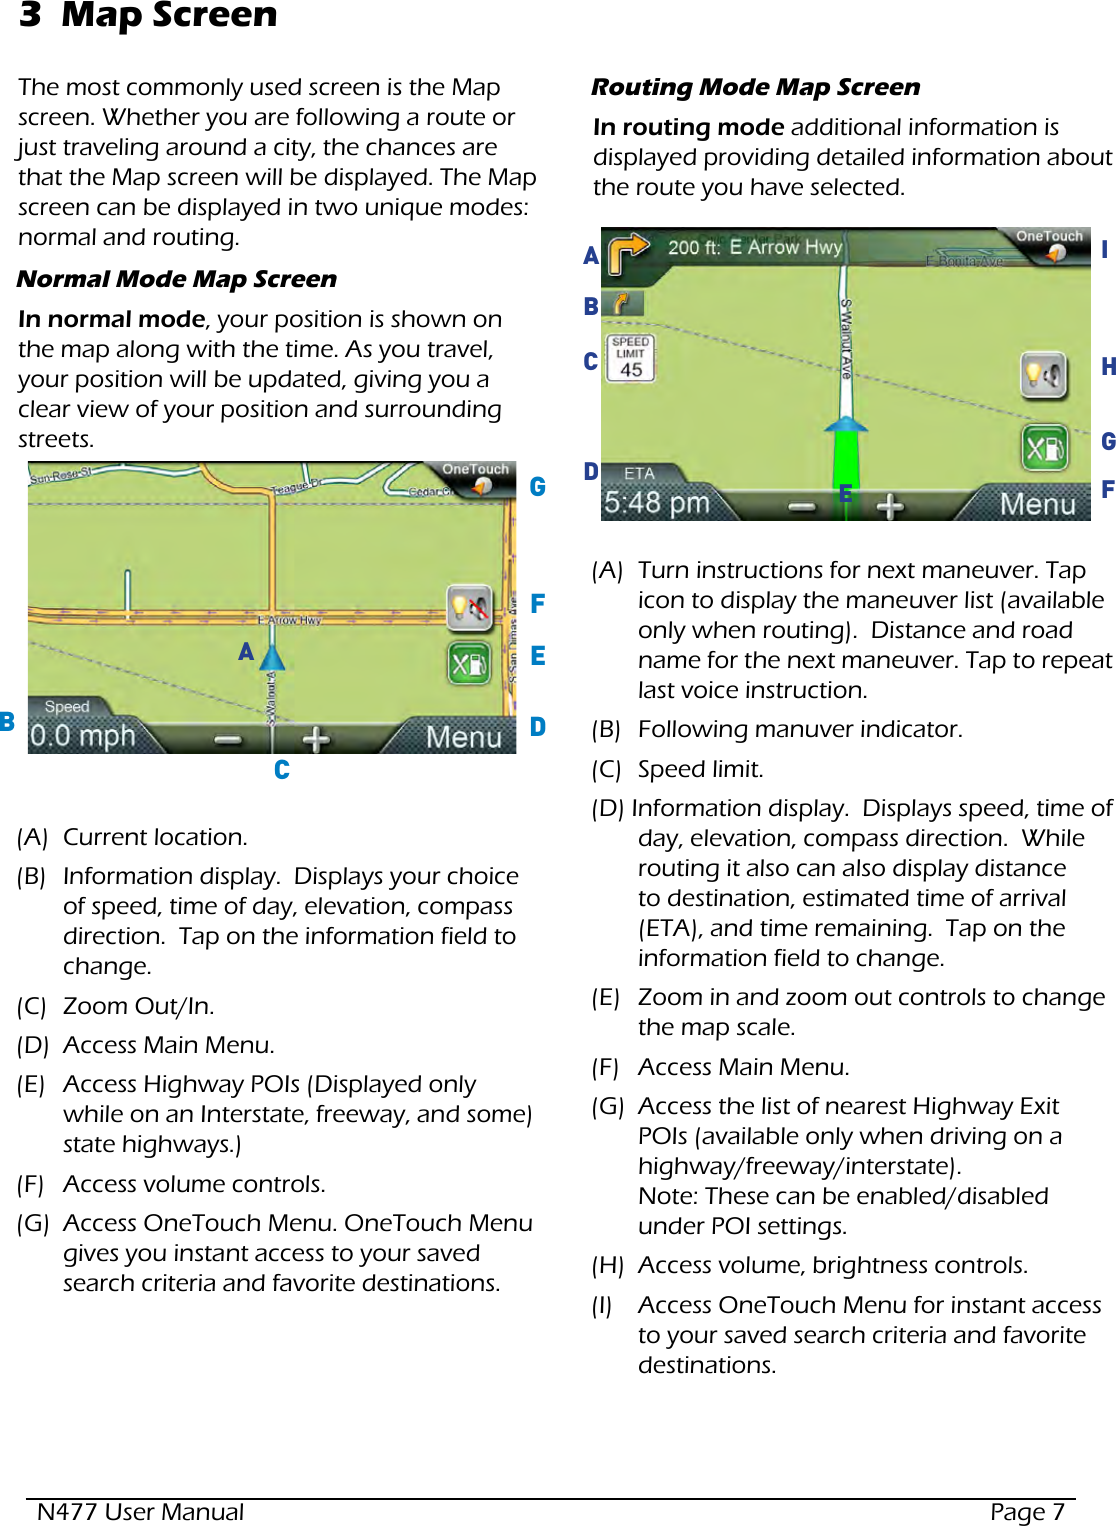 N477 User Manual  Page 73  Map ScreenThe most commonly used screen is the Map screen. Whether you are following a route or just traveling around a city, the chances are that the Map screen will be displayed. The Map screen can be displayed in two unique modes: normal and routing.Normal Mode Map ScreenIn normal mode, your position is shown on the map along with the time. As you travel, your position will be updated, giving you a clear view of your position and surrounding streets.  (A)  Current location.(B)  Information display.  Displays your choice of speed, time of day, elevation, compass direction.  Tap on the information field to change.(C)  Zoom Out/In.(D)  Access Main Menu.(E)  Access Highway POIs (Displayed only while on an Interstate, freeway, and some) state highways.)(F)  Access volume controls.(G)  Access OneTouch Menu. OneTouch Menu gives you instant access to your saved search criteria and favorite destinations.ABCDEFGRouting Mode Map ScreenIn routing mode additional information is displayed providing detailed information about the route you have selected.  (A)  Turn instructions for next maneuver. Tap icon to display the maneuver list (available only when routing).  Distance and road name for the next maneuver. Tap to repeat last voice instruction. (B)  Following manuver indicator.(C)  Speed limit.(D) Information display.  Displays speed, time of day, elevation, compass direction.  While routing it also can also display distance to destination, estimated time of arrival (ETA), and time remaining.  Tap on the information field to change.(E)  Zoom in and zoom out controls to change the map scale.(F)  Access Main Menu.(G)  Access the list of nearest Highway Exit POIs (available only when driving on a highway/freeway/interstate). Note: These can be enabled/disabled under POI settings. (H)  Access volume, brightness controls.(I)  Access OneTouch Menu for instant access to your saved search criteria and favorite destinations.FGHIACDBE